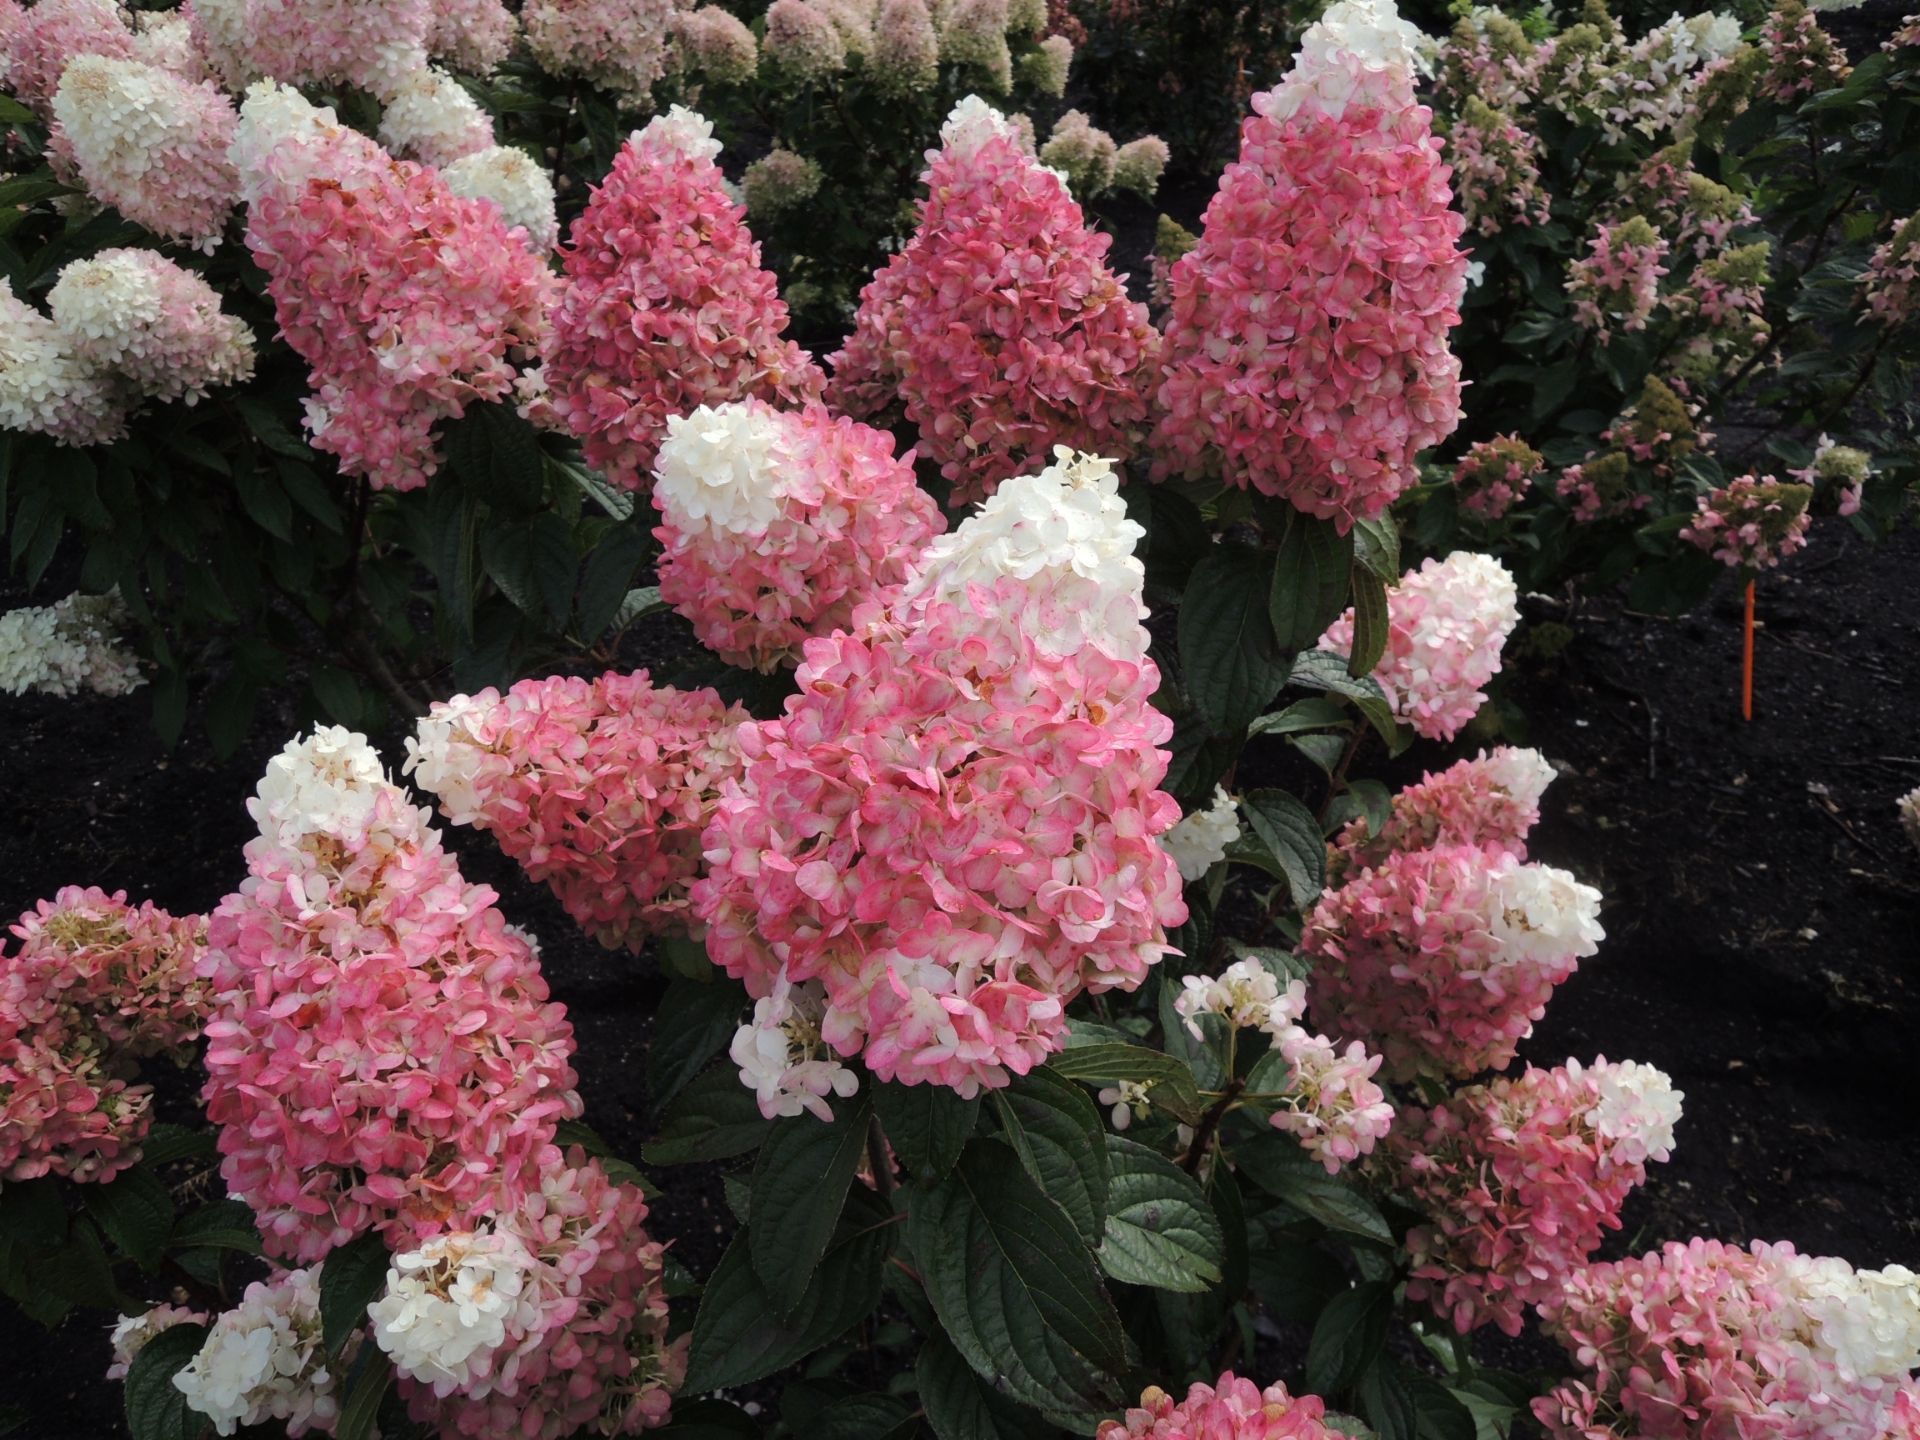 images/plants/hydrangea/hyd-magical-ruby-snow/hyd-magical-ruby-snow-0003.jpg